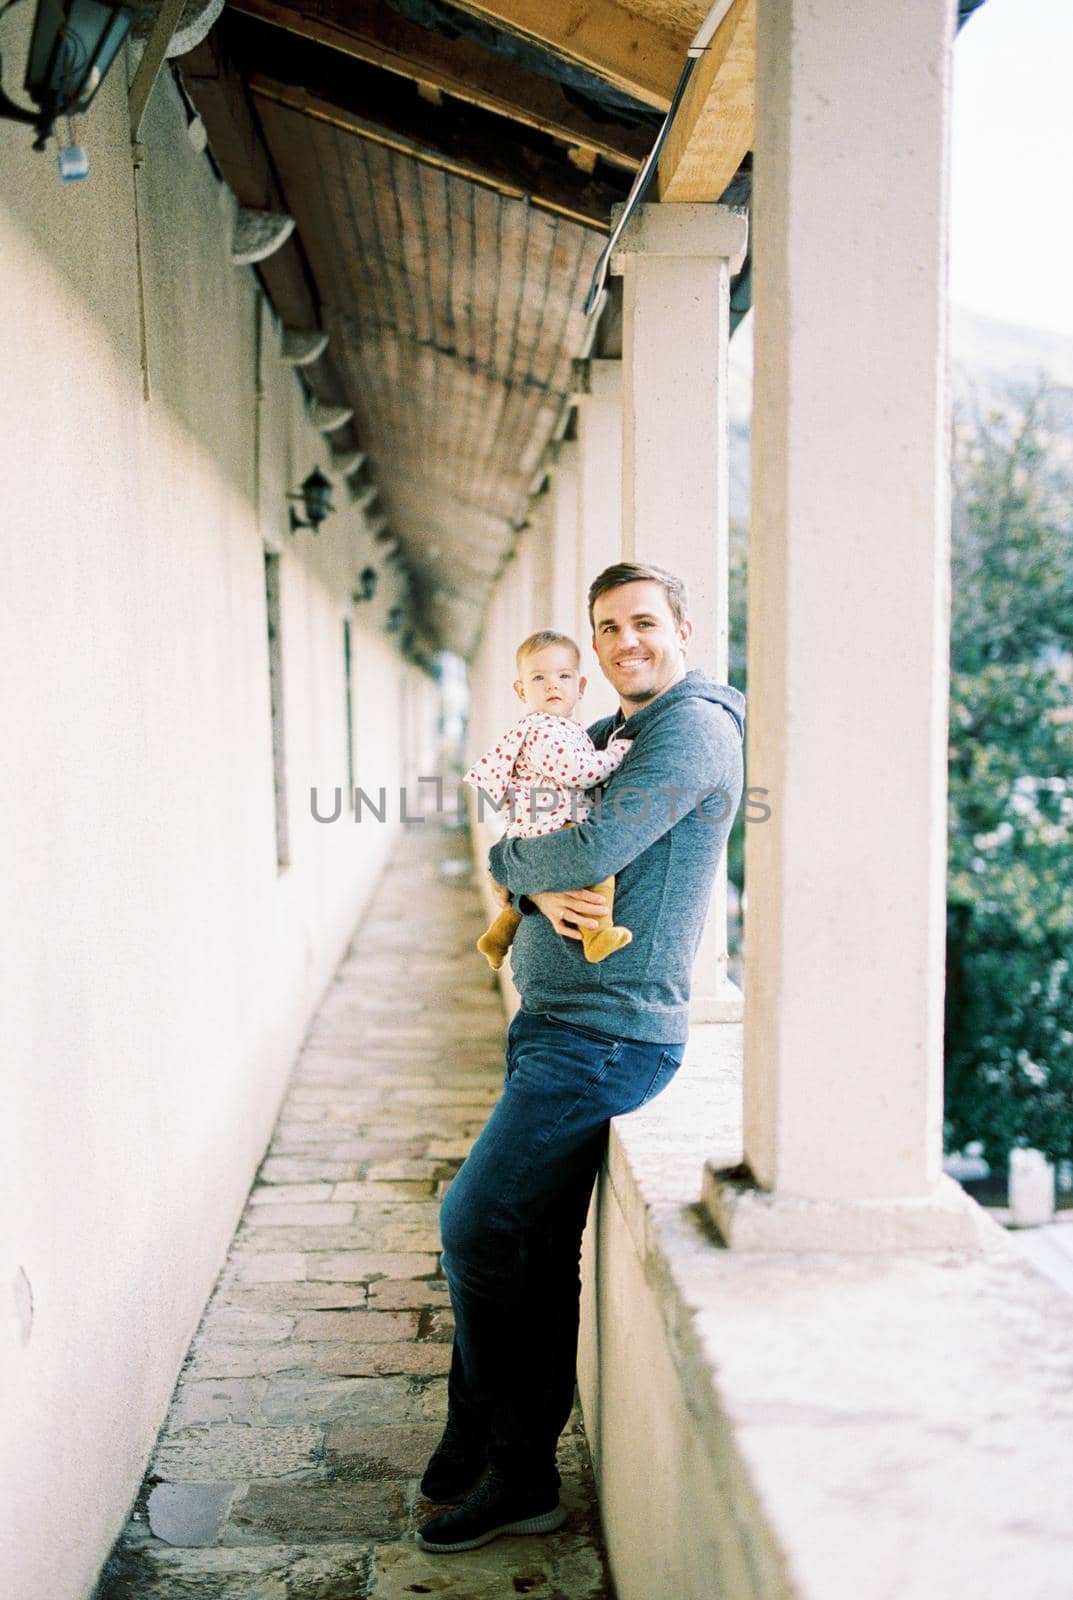 Smiling dad with a baby in his arms stands on the terrace leaning against a stone fence by Nadtochiy